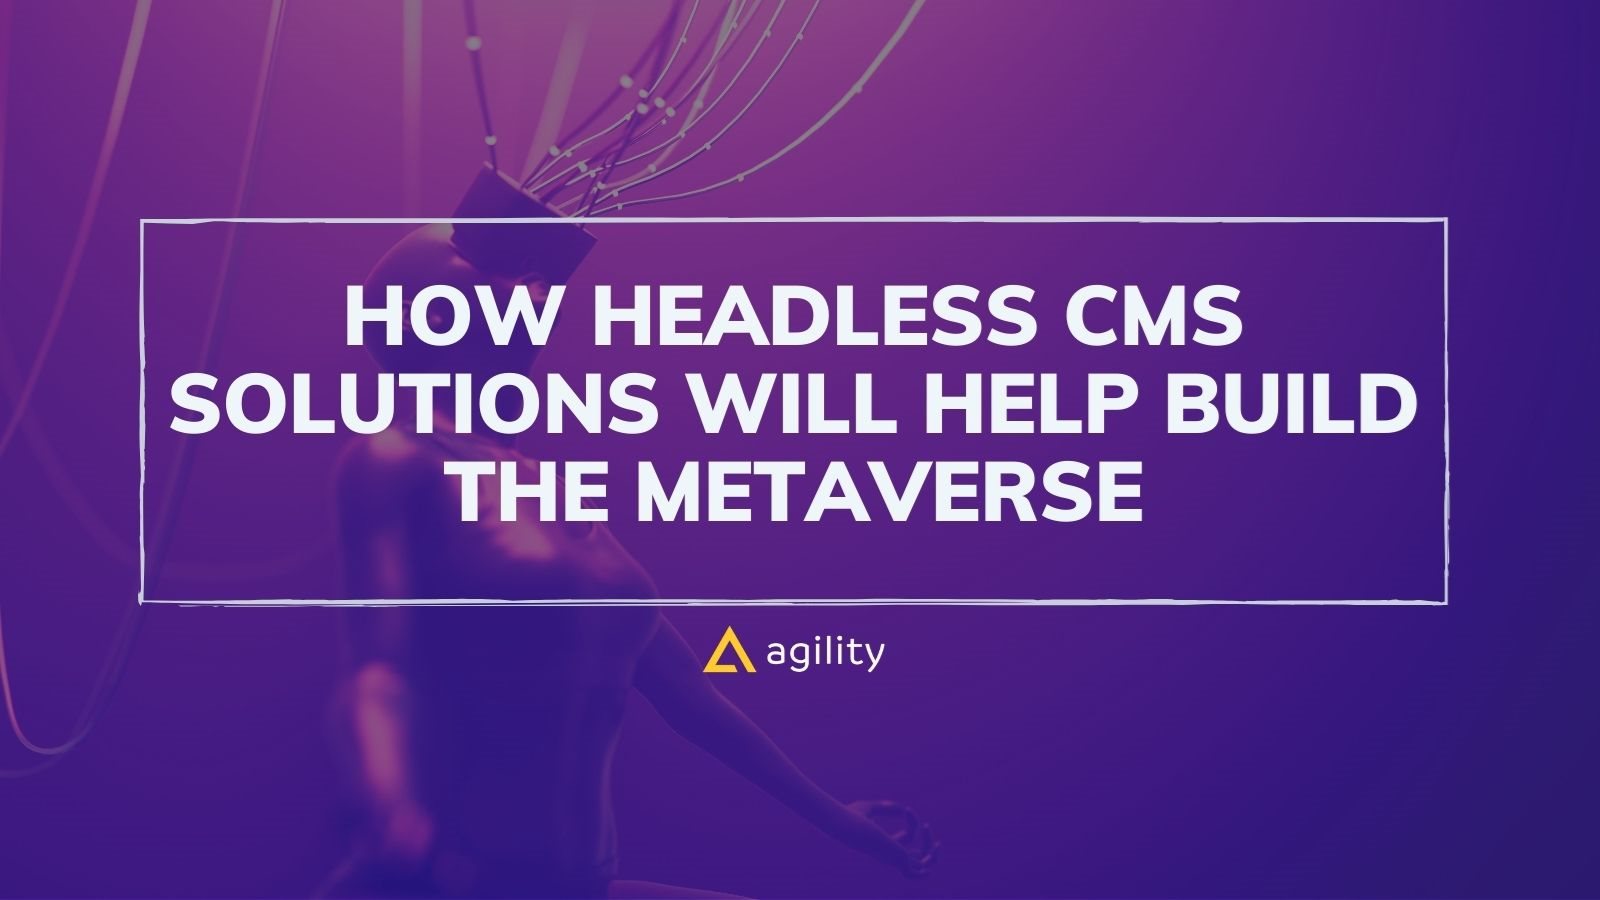  Headless CMS in the Metaverse